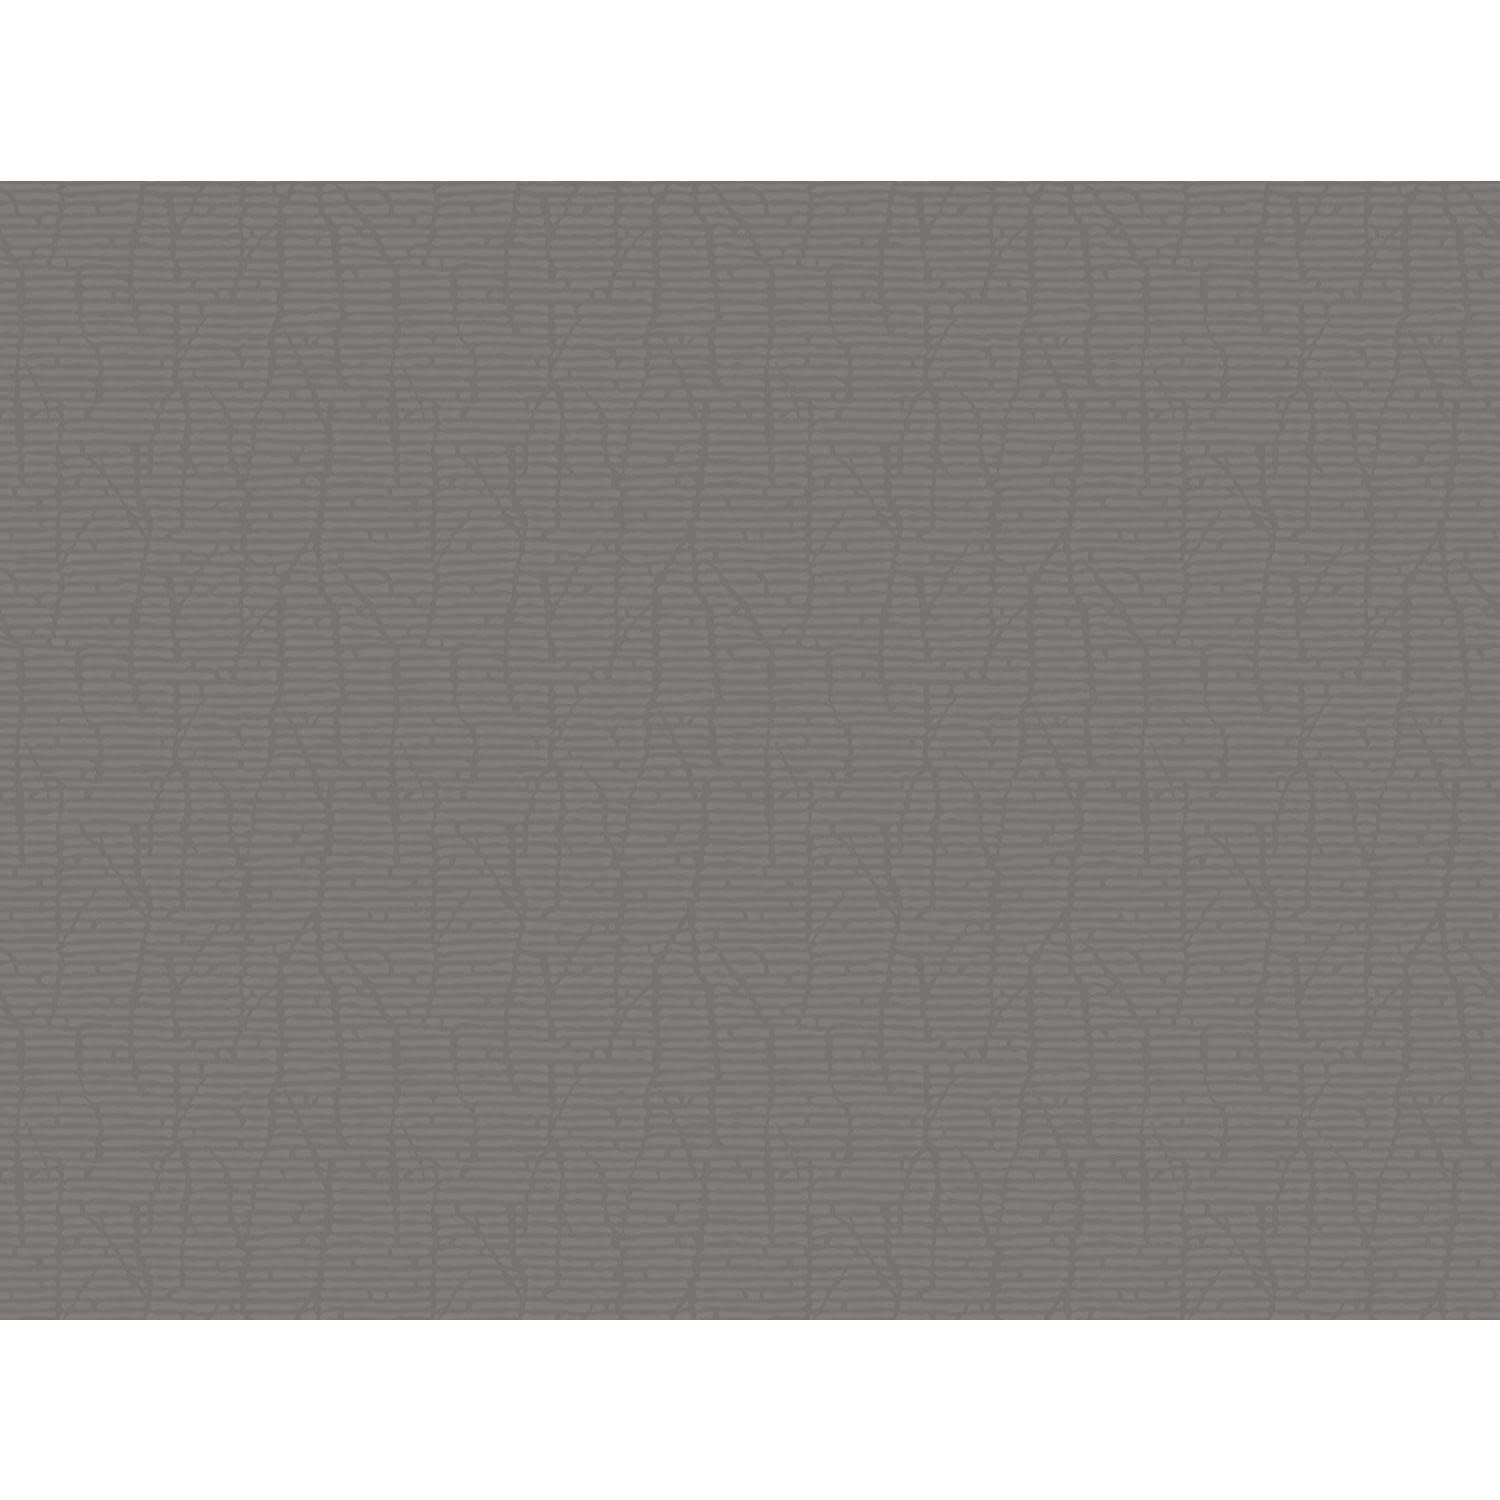 Shop York Wallcoverings SD37 RES 5 116 Square Foot   Ronald